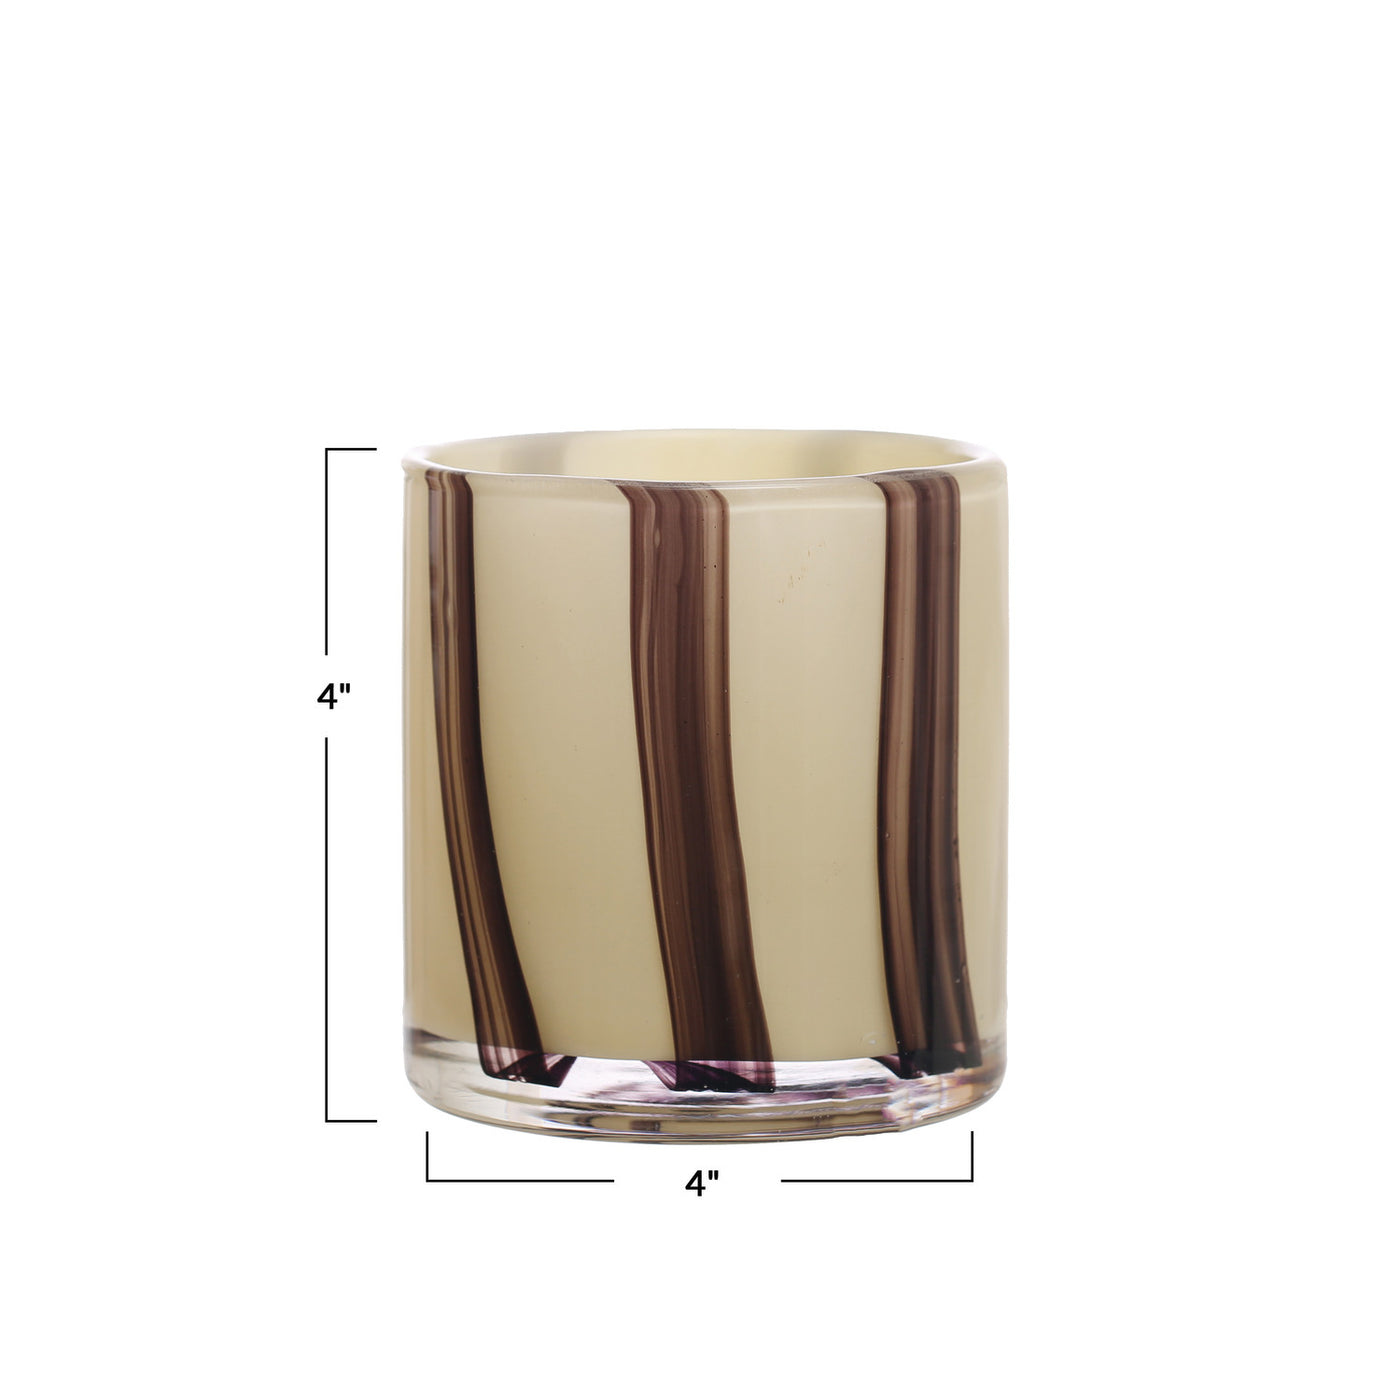 4" x 4" Glass Candle Holder/Vase with Stripes